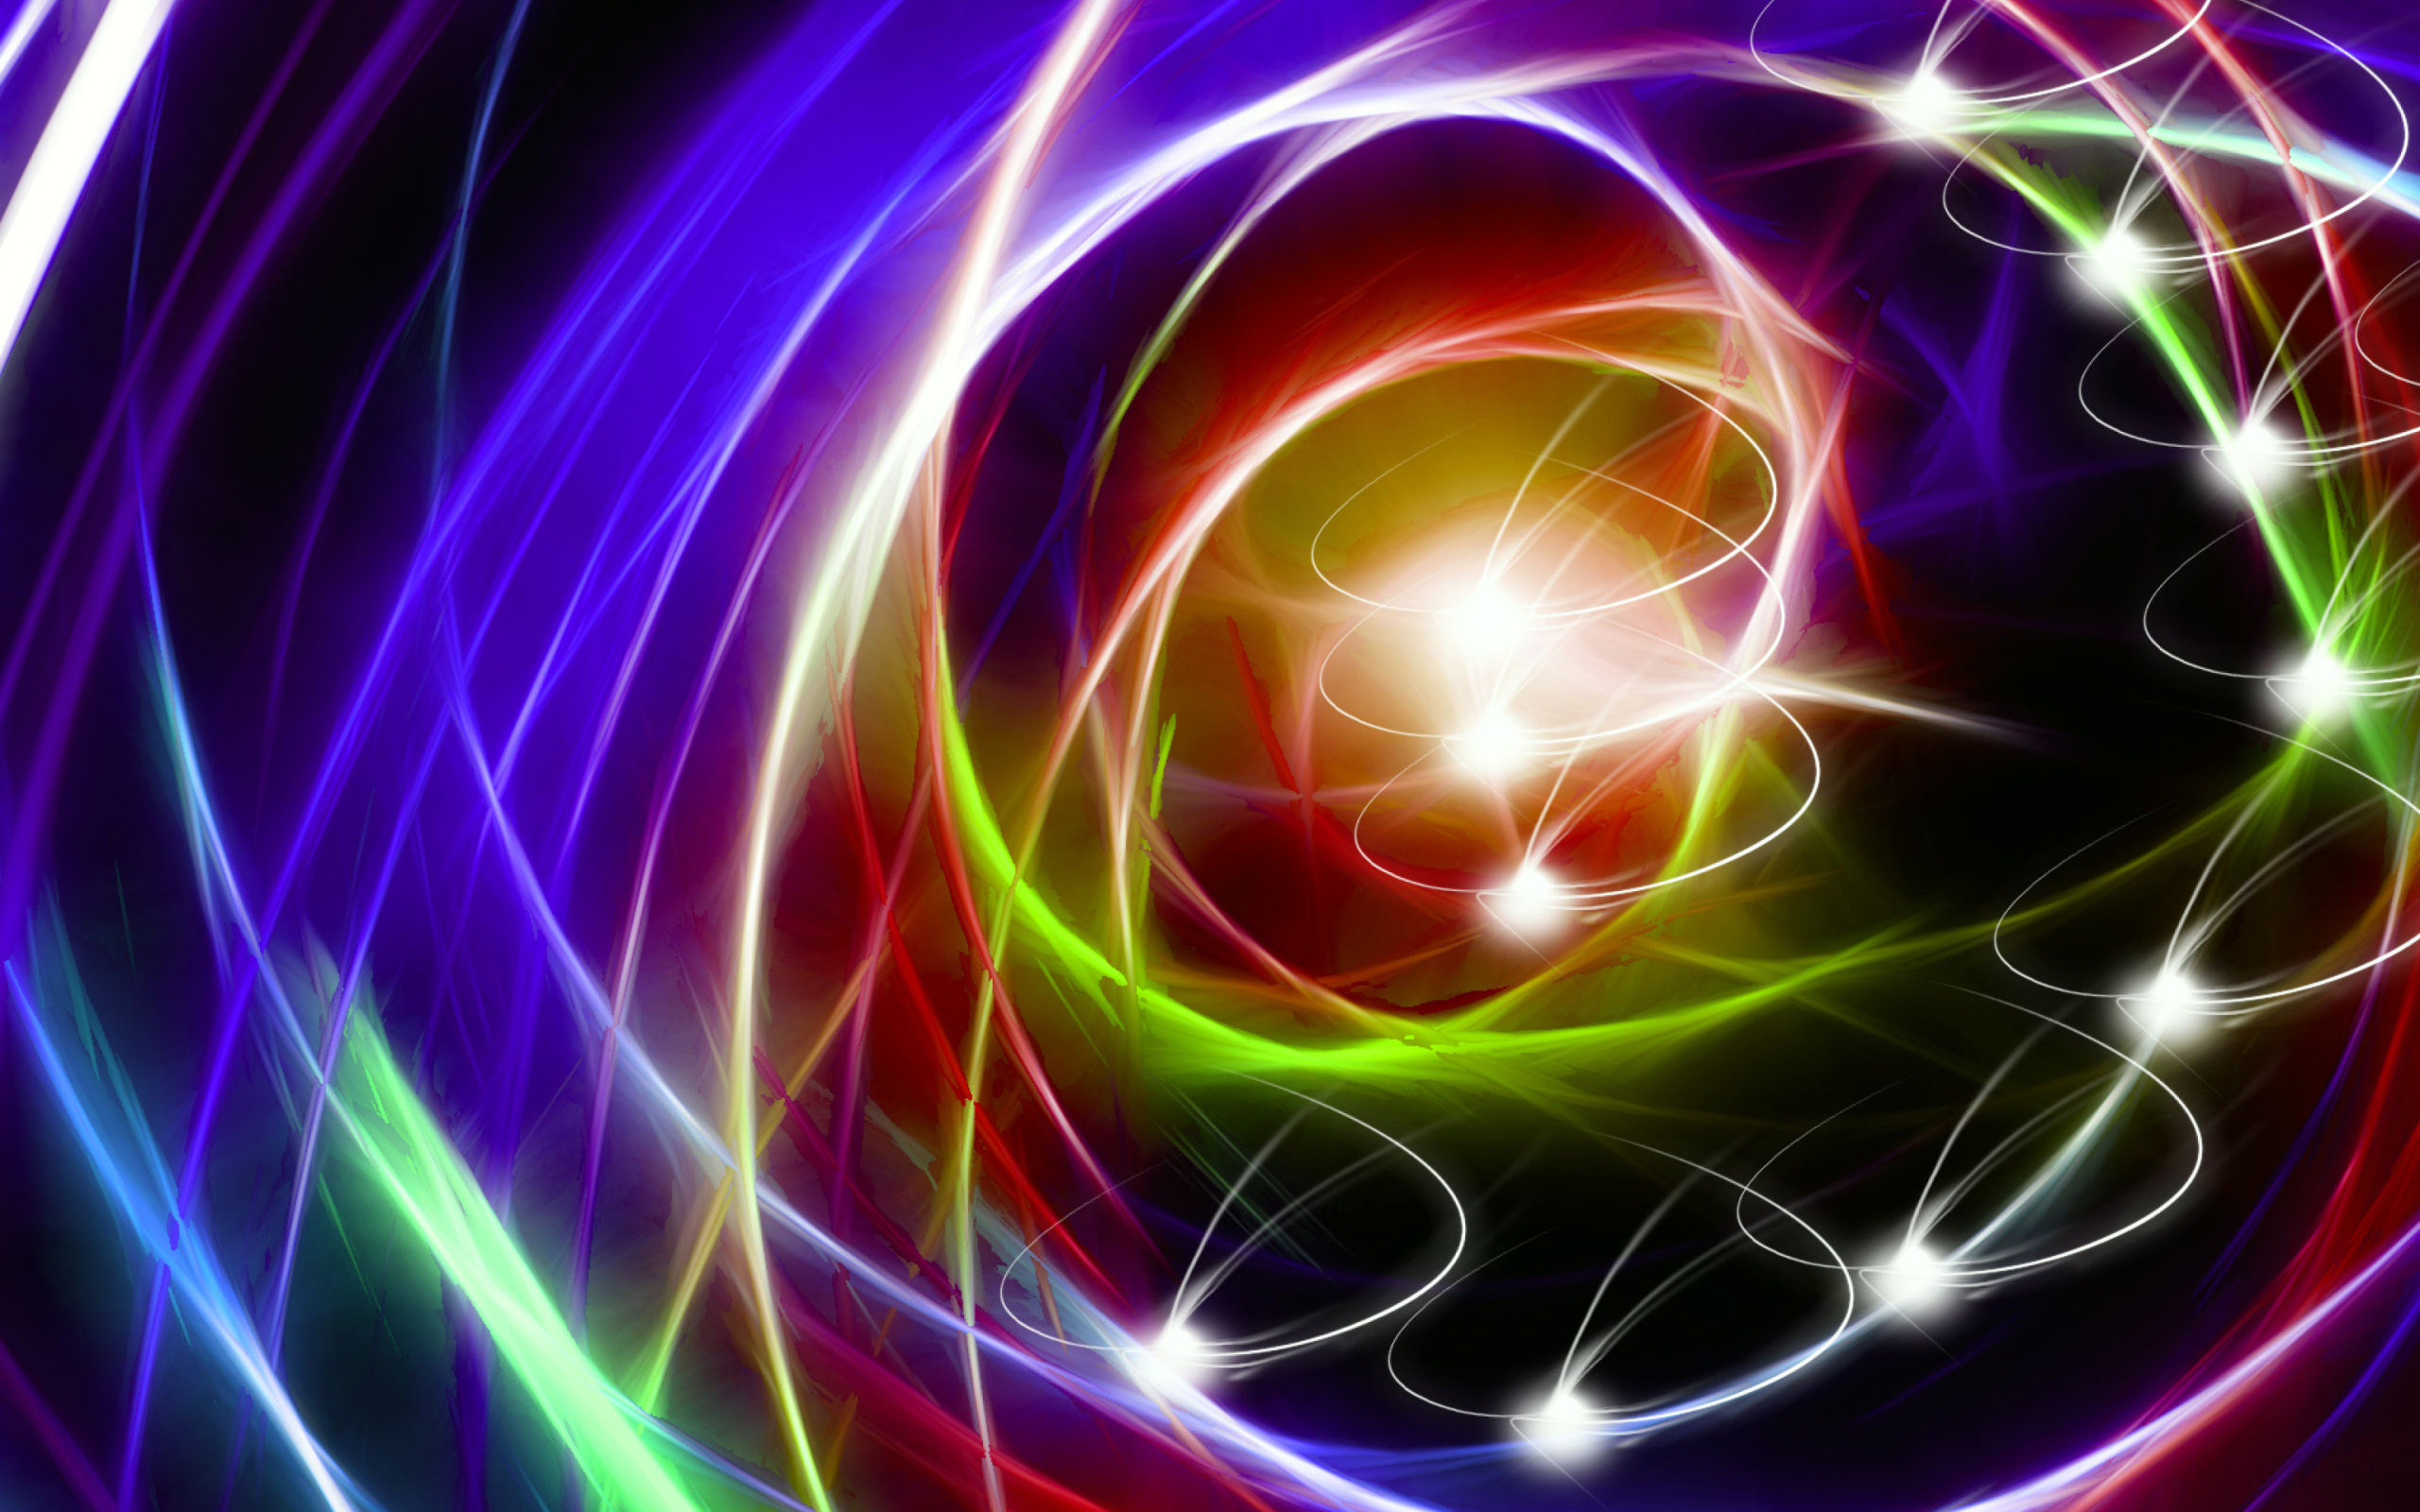 Abstraction chaos Rays wallpaper 2560x1600